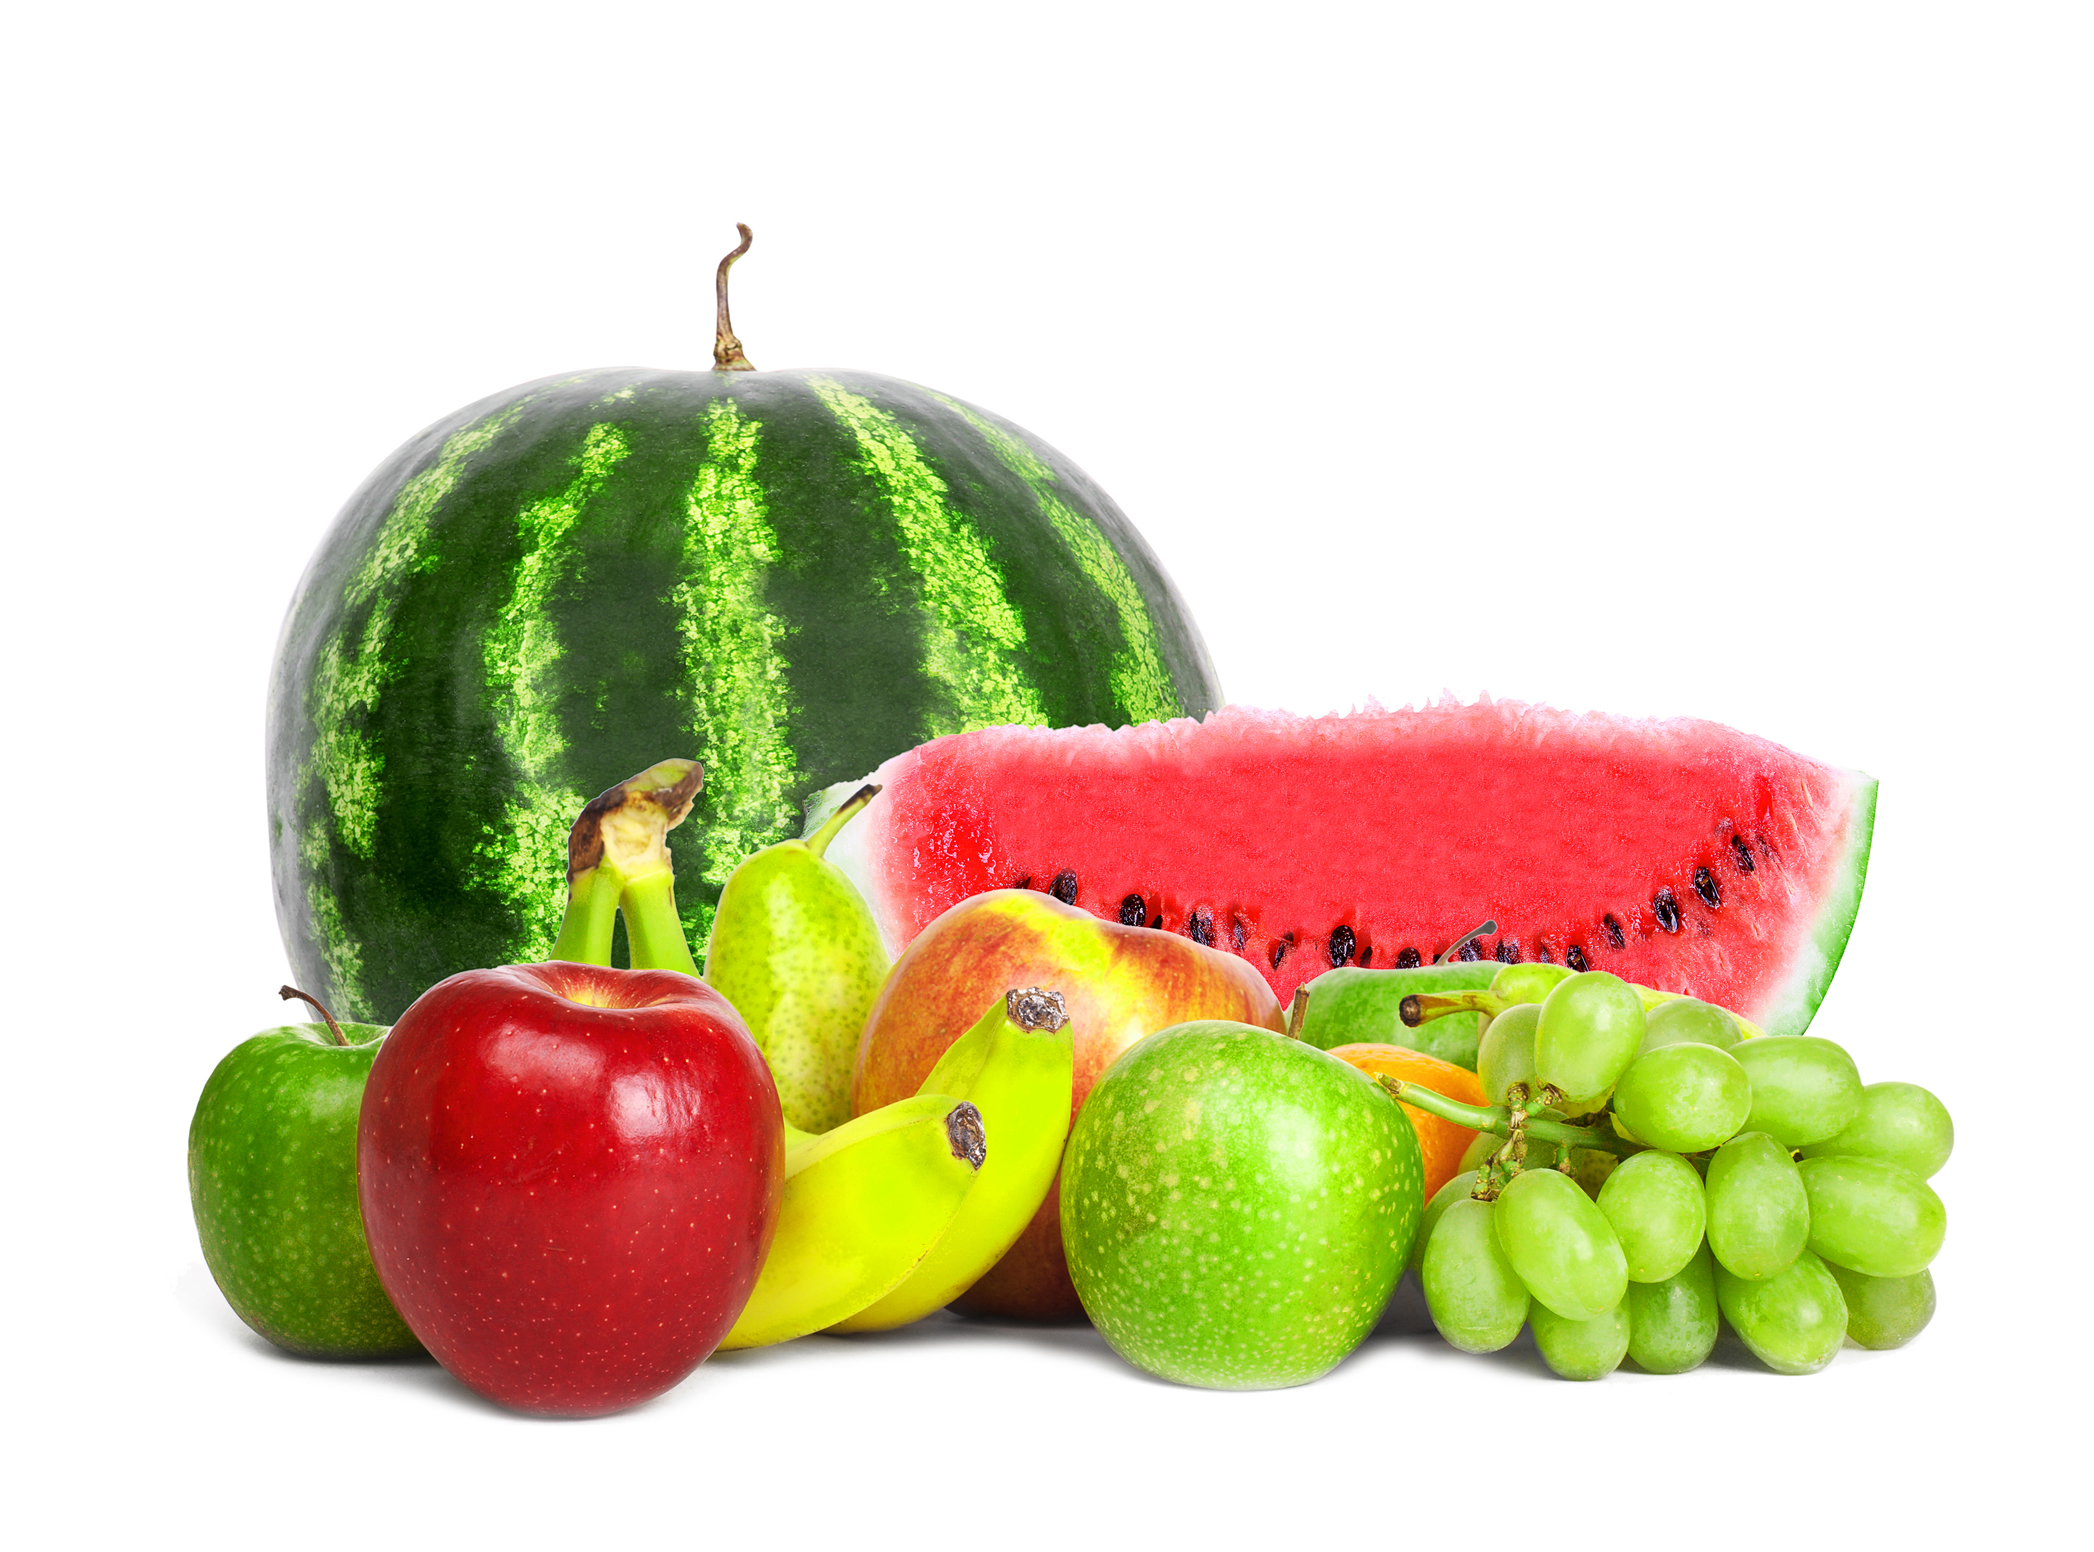 watermelon and  Fruits, photo, wallpapers for desktop, Apples